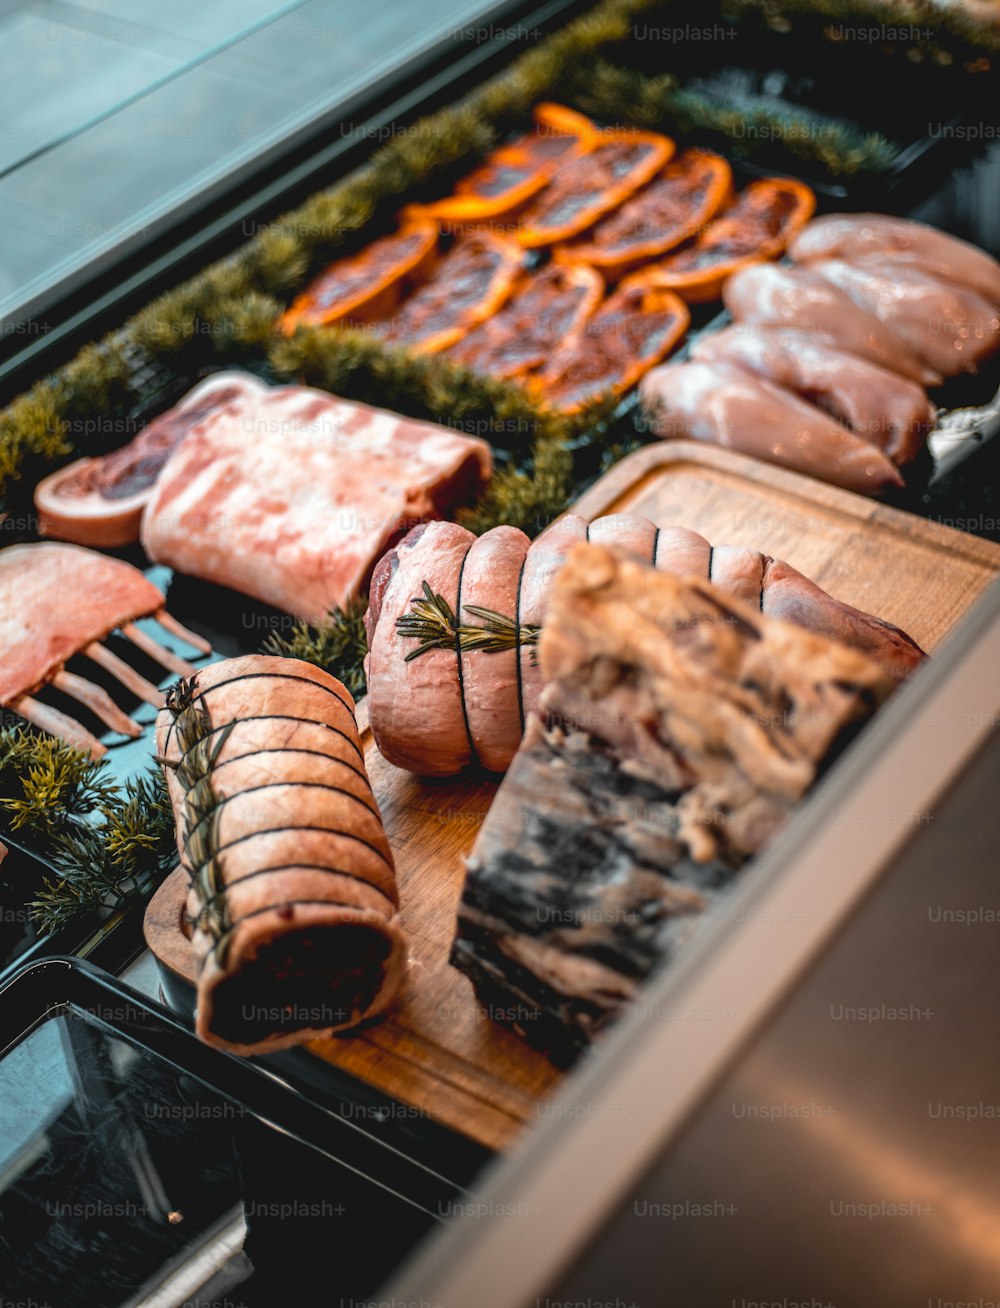 a display of meats and sausages in a display case